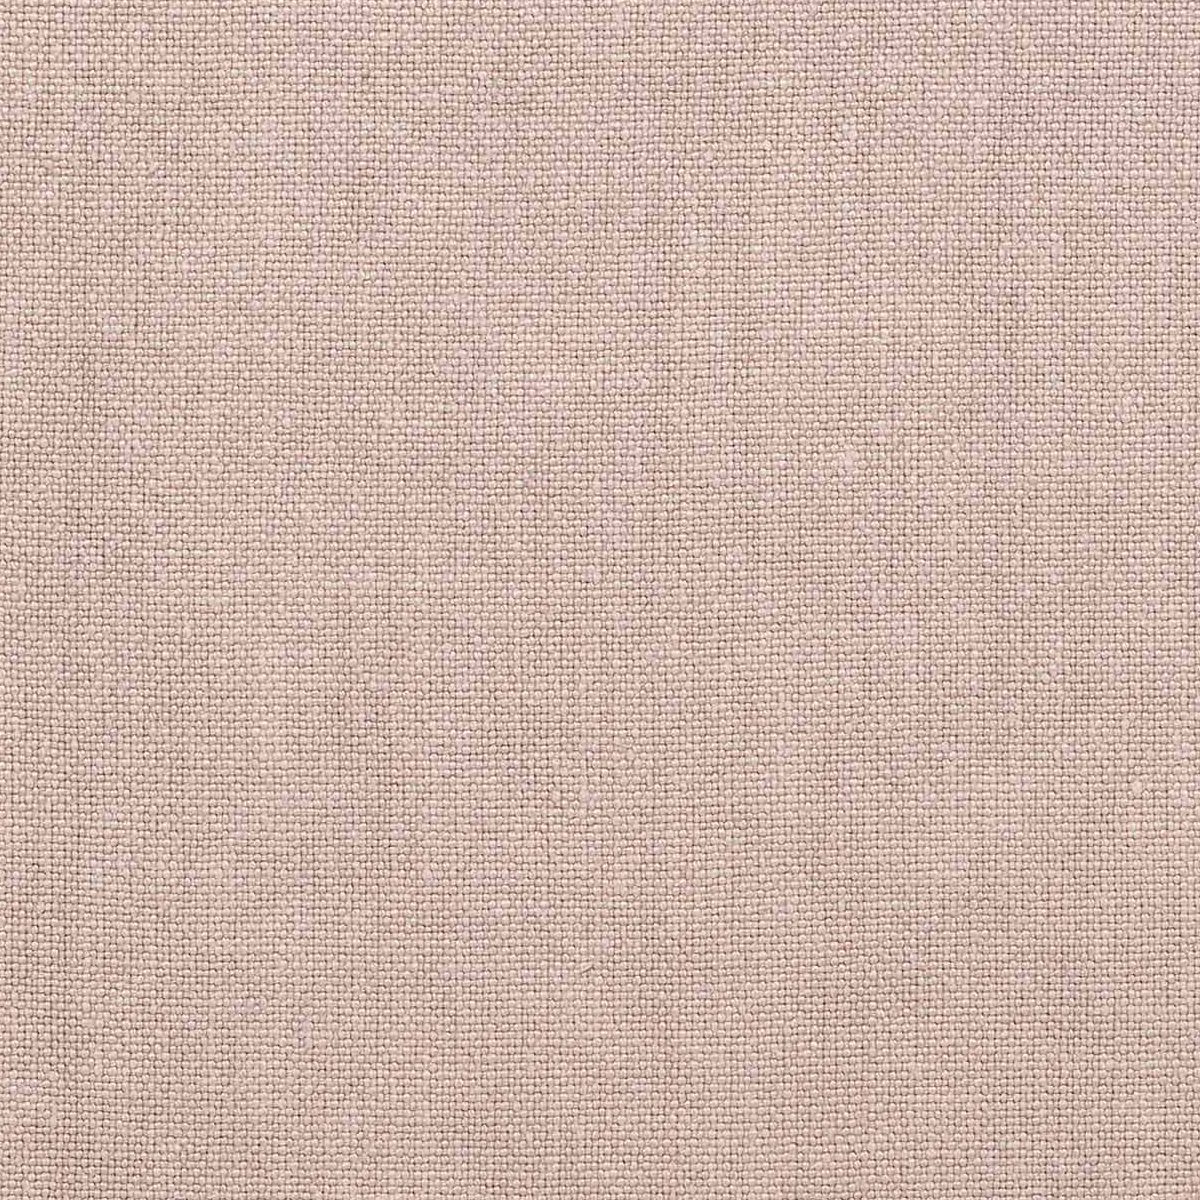 Sample of hemp fabric in a blush pink colourway